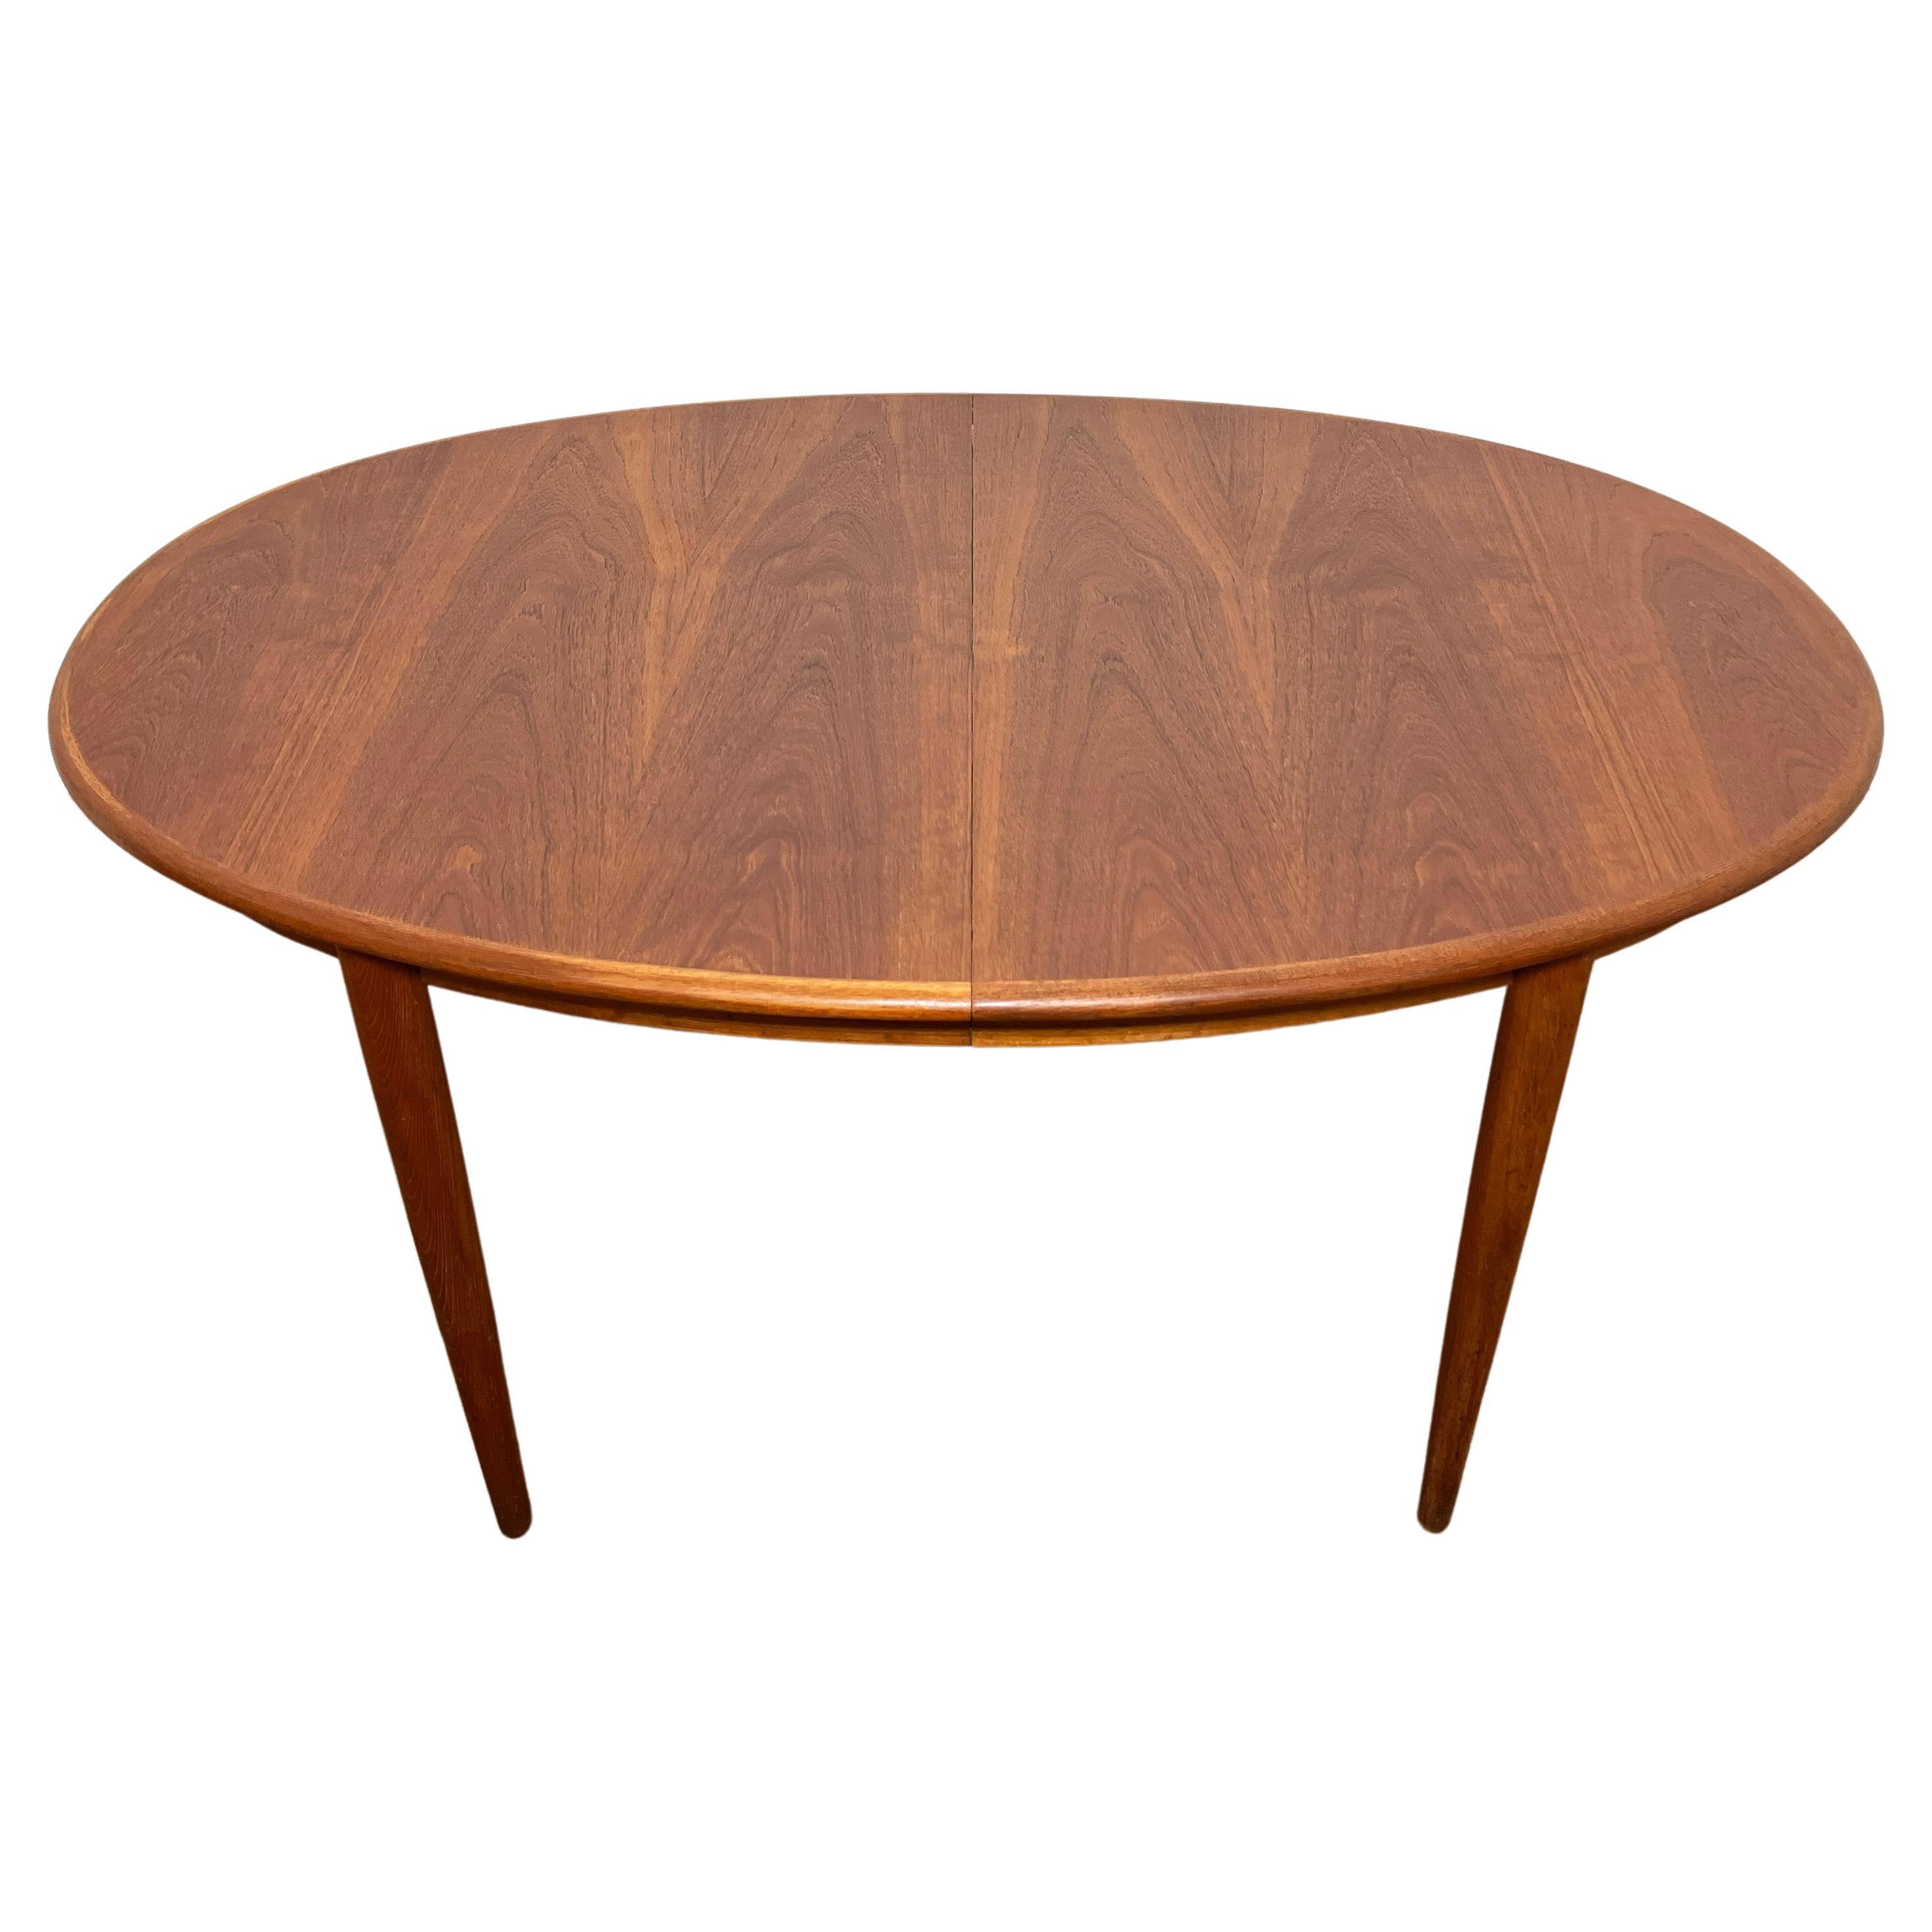 Danish Teak Oval Dining Table With Two Leaves by Gudme, Circa 1960s For Sale